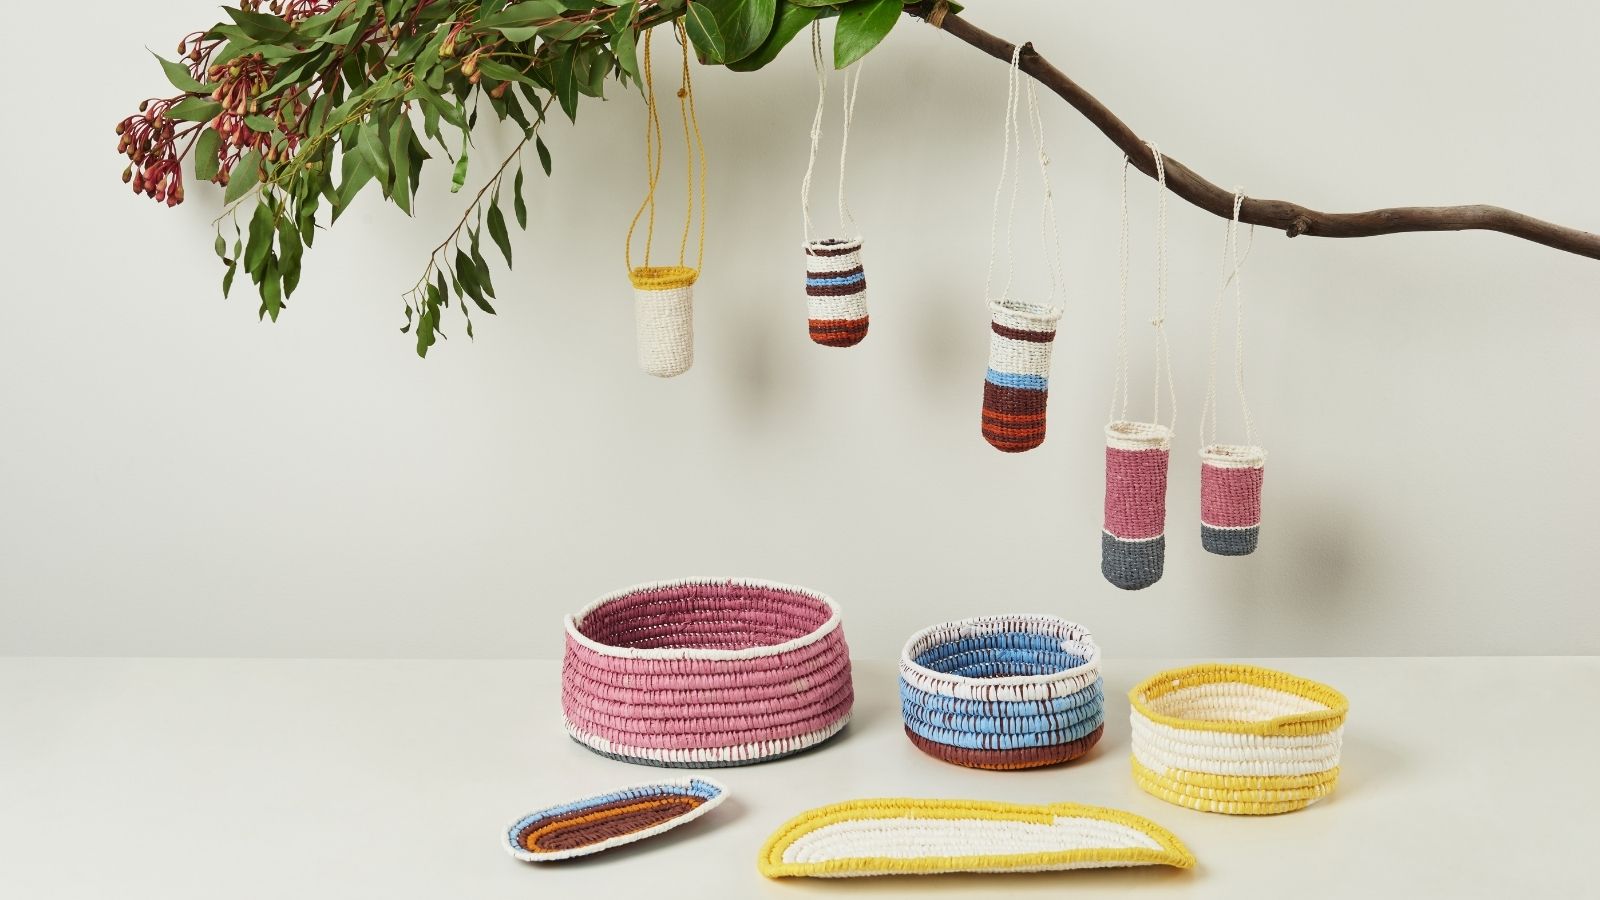 Five knitted buckets hanging off a branch underneath three colored bowls.